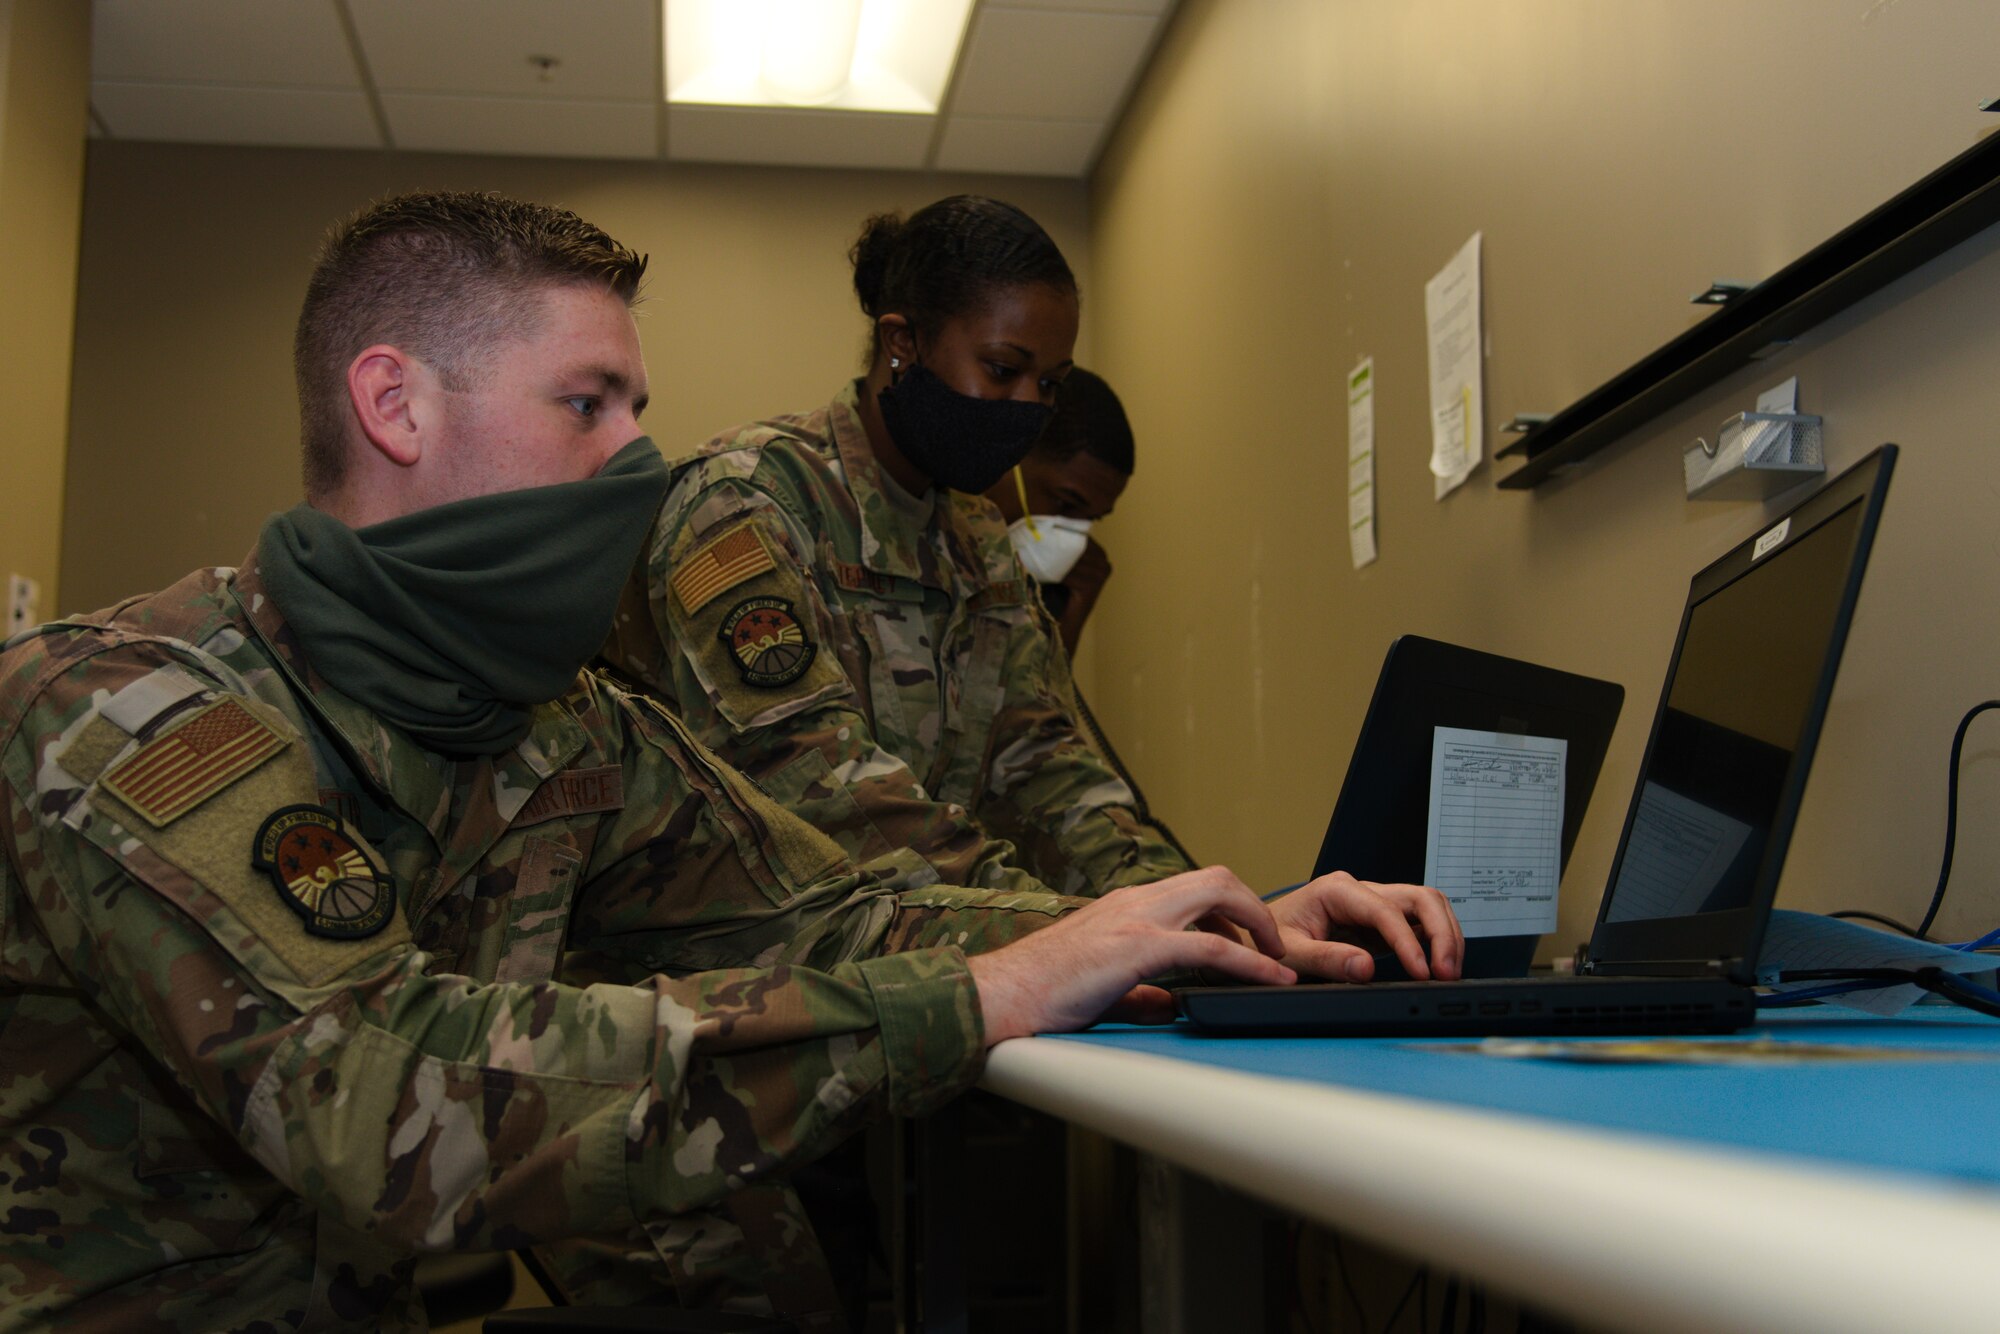 Airmen from the 6th Communications Squadron (CS) troubleshoot customer maintenance requests at MacDill Air Force Base, Fla., Apr. 23, 2020.